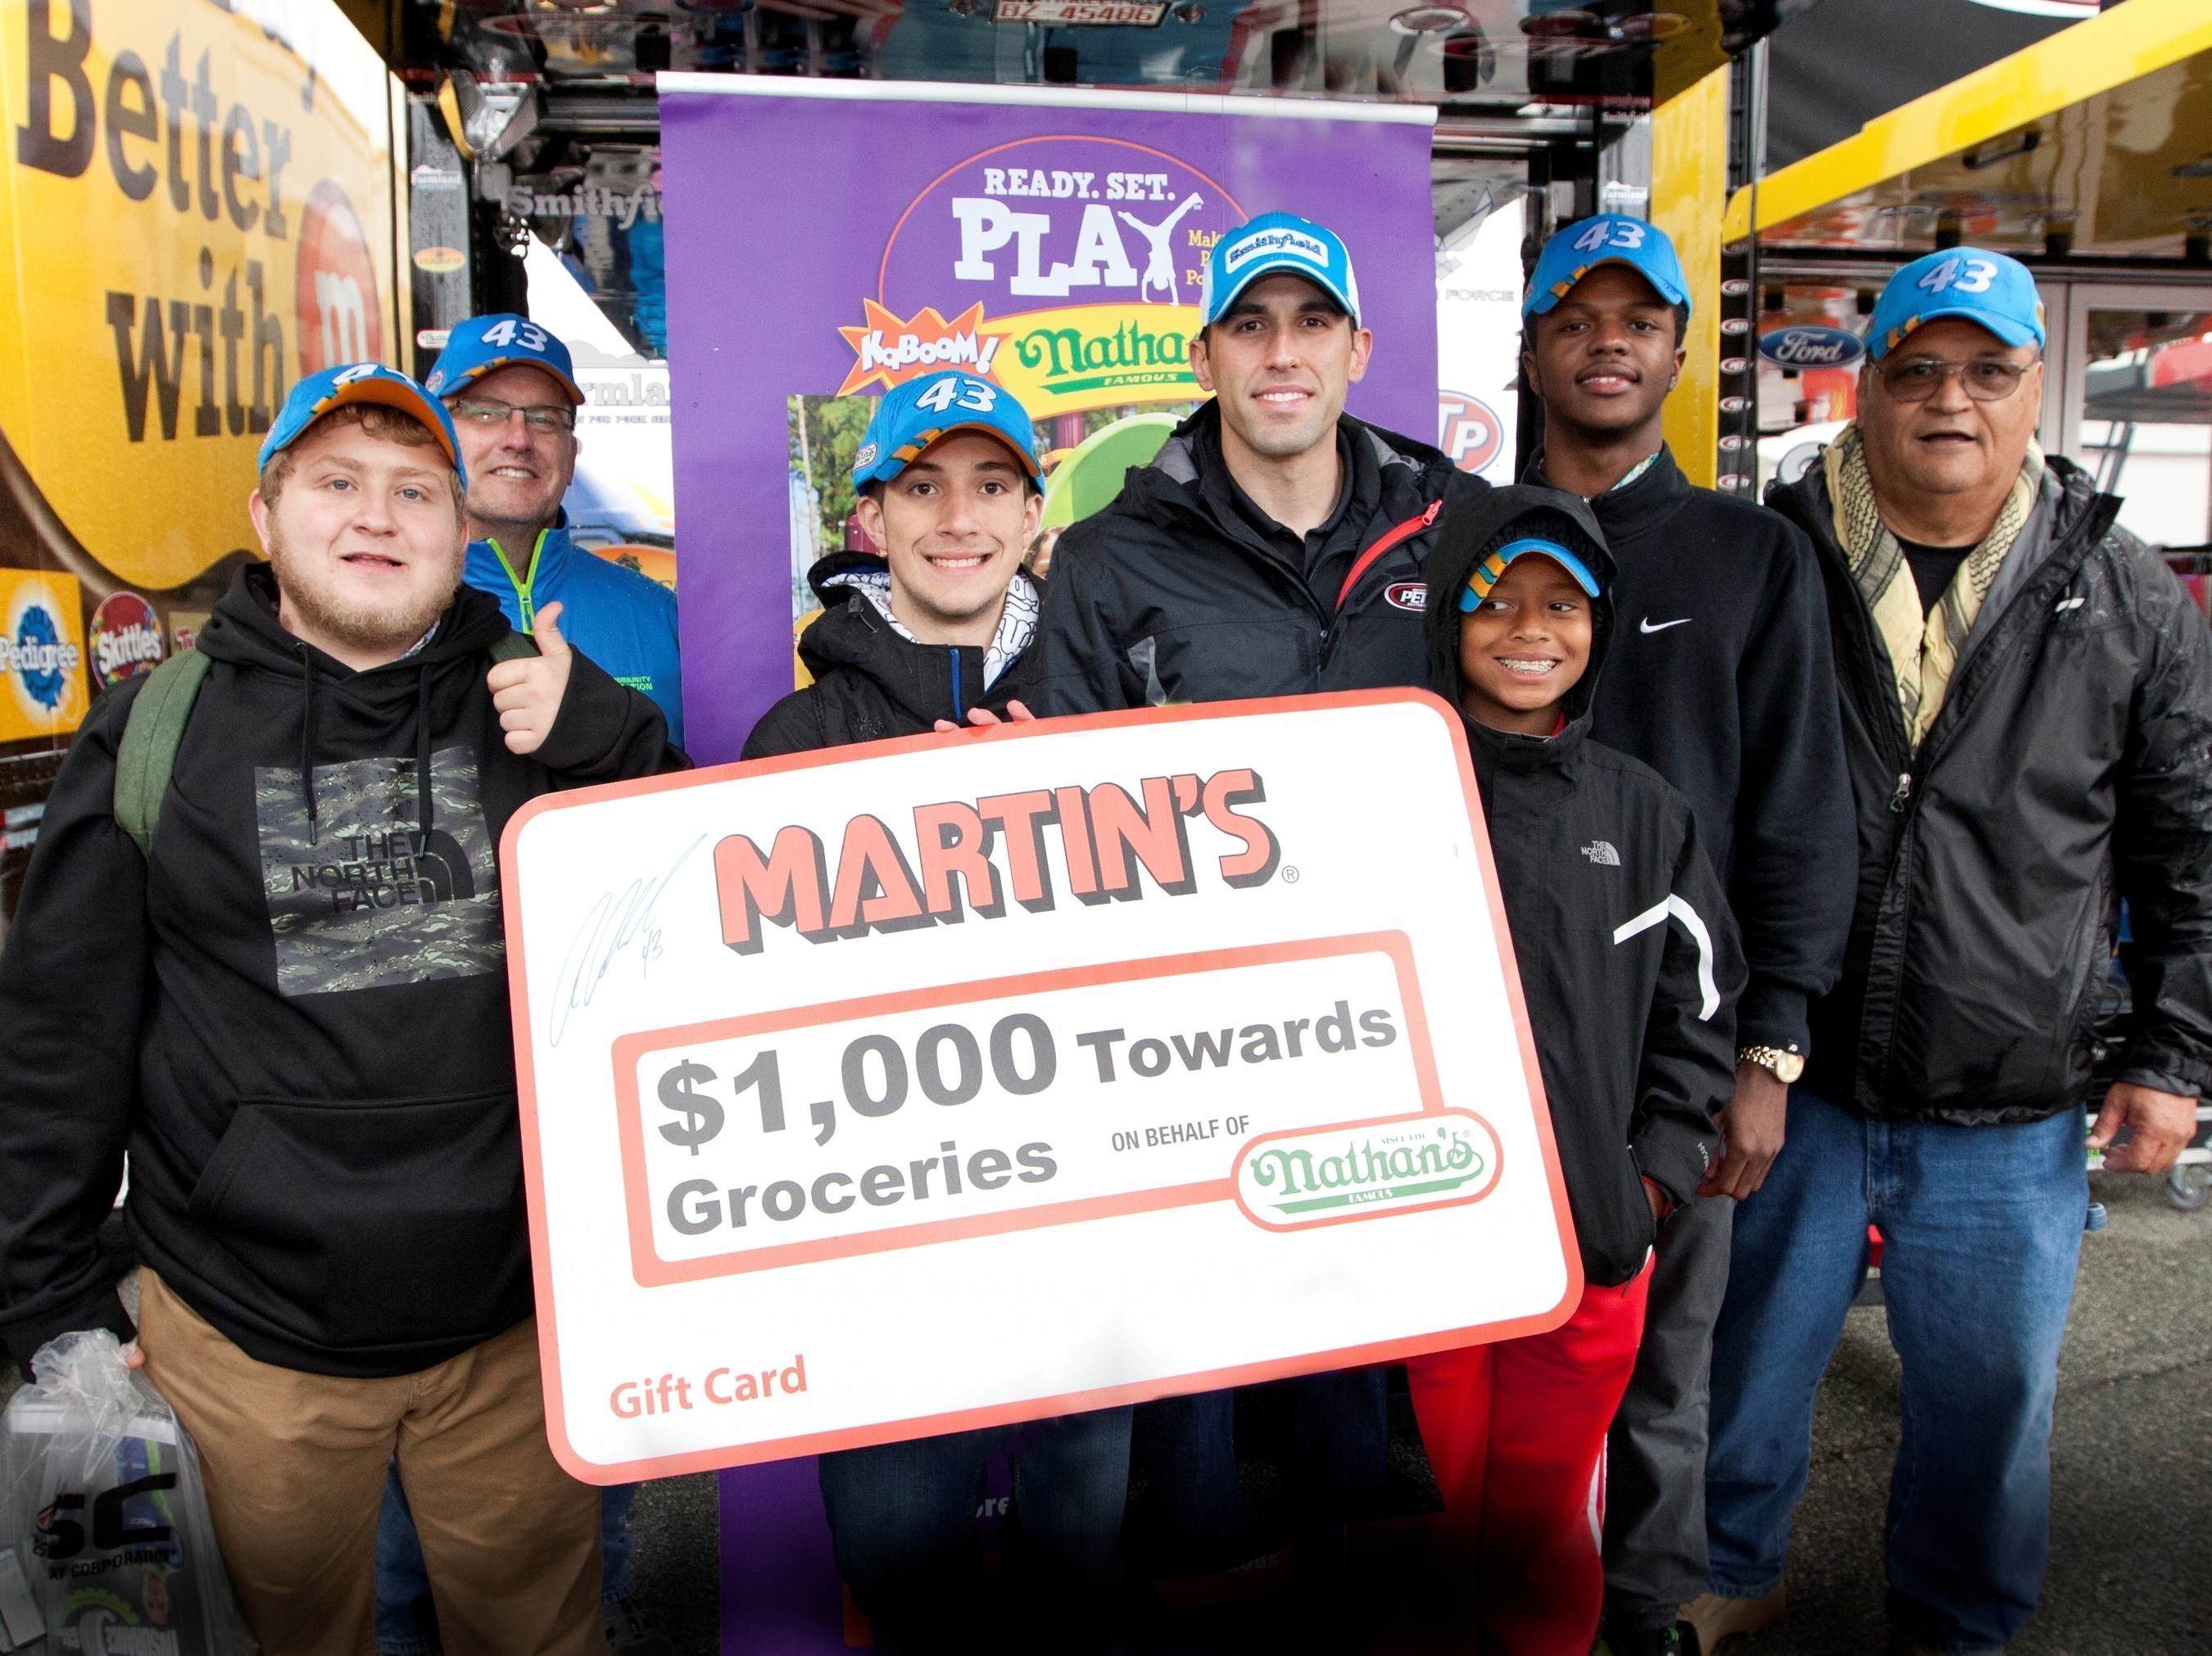 NASCAR driver Aric Almirola presented representatives from United Methodist Family Services with a MARTIN's Food Markets gift card worth $1,000 towards the purchase of groceries, courtesy of Nathan's Famous.